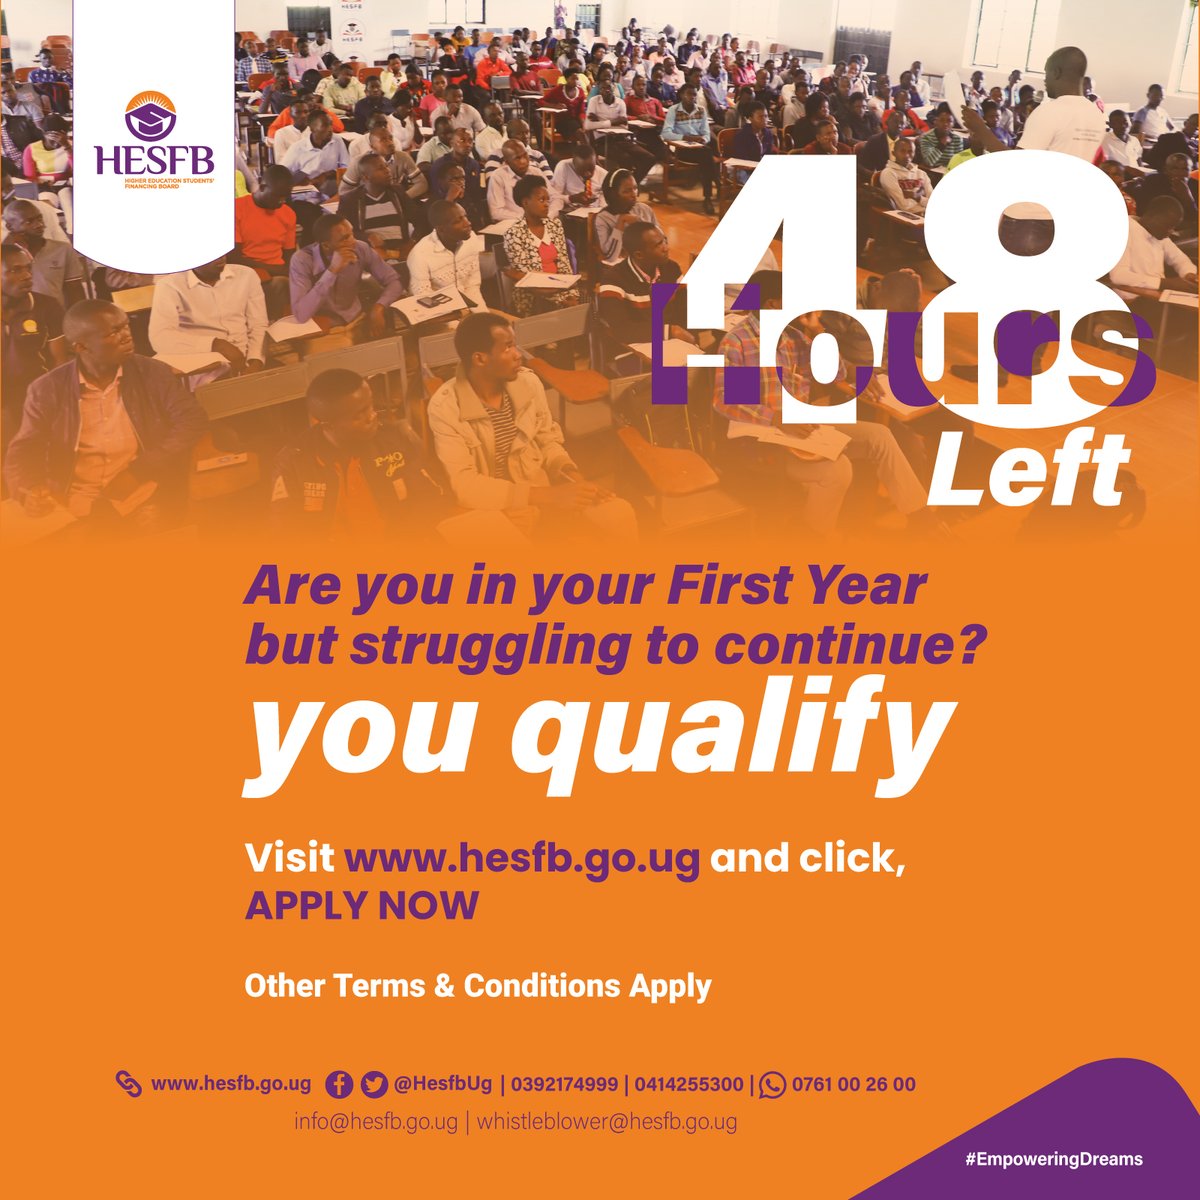 The Clock is ticking: Have you Applied yet? 48 hours to Deadline. Visit hesfb.go.ug and click APPLY NOW. #StudentLoans2024 #EmpoweringDreams